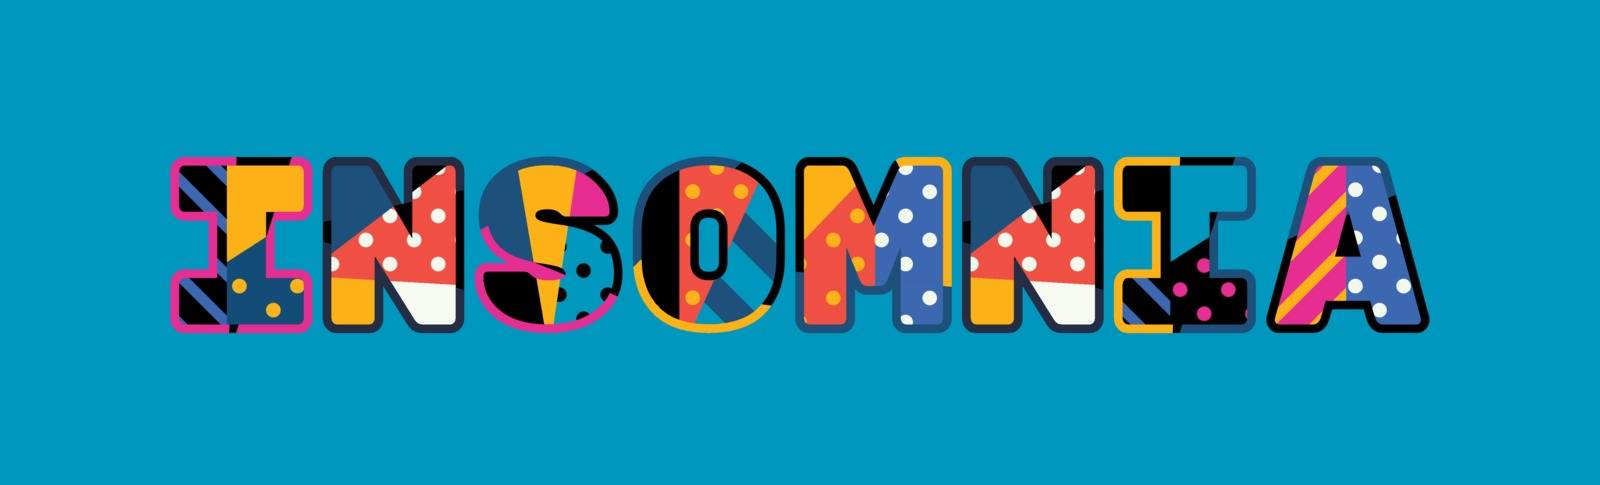 The word INSOMNIA concept written in colorful abstract typography. Vector EPS 10 available.